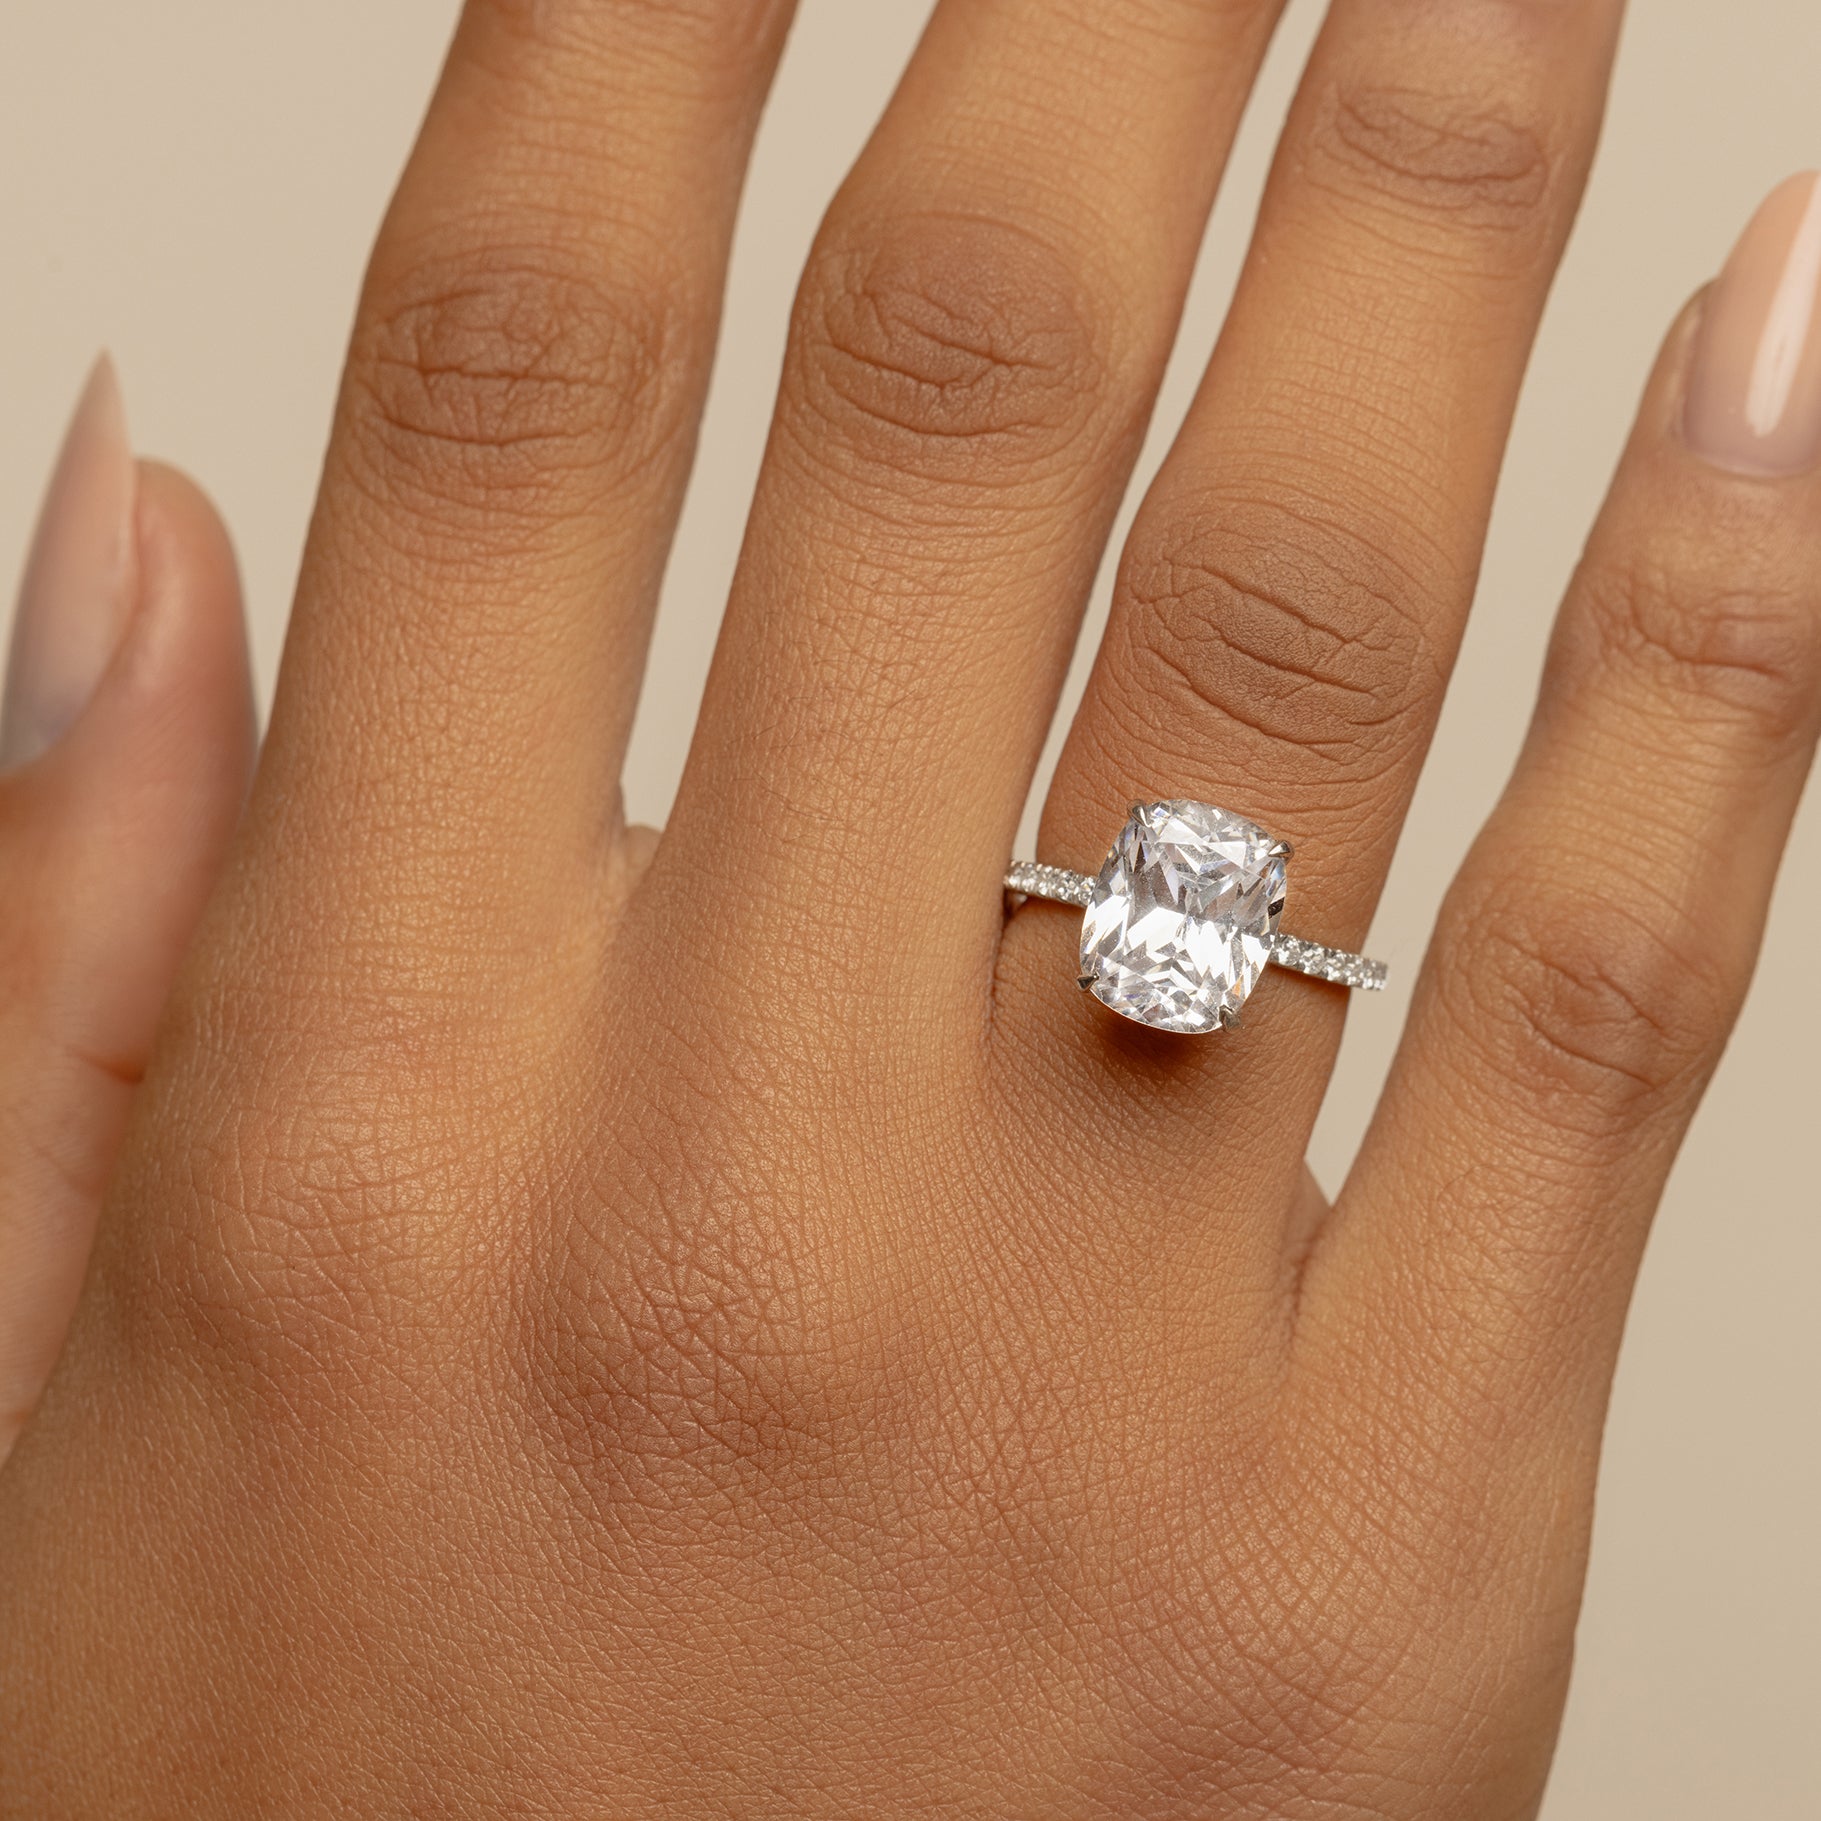 Elongated Cushion Cut Engagement Ring With Hidden Halo On Body